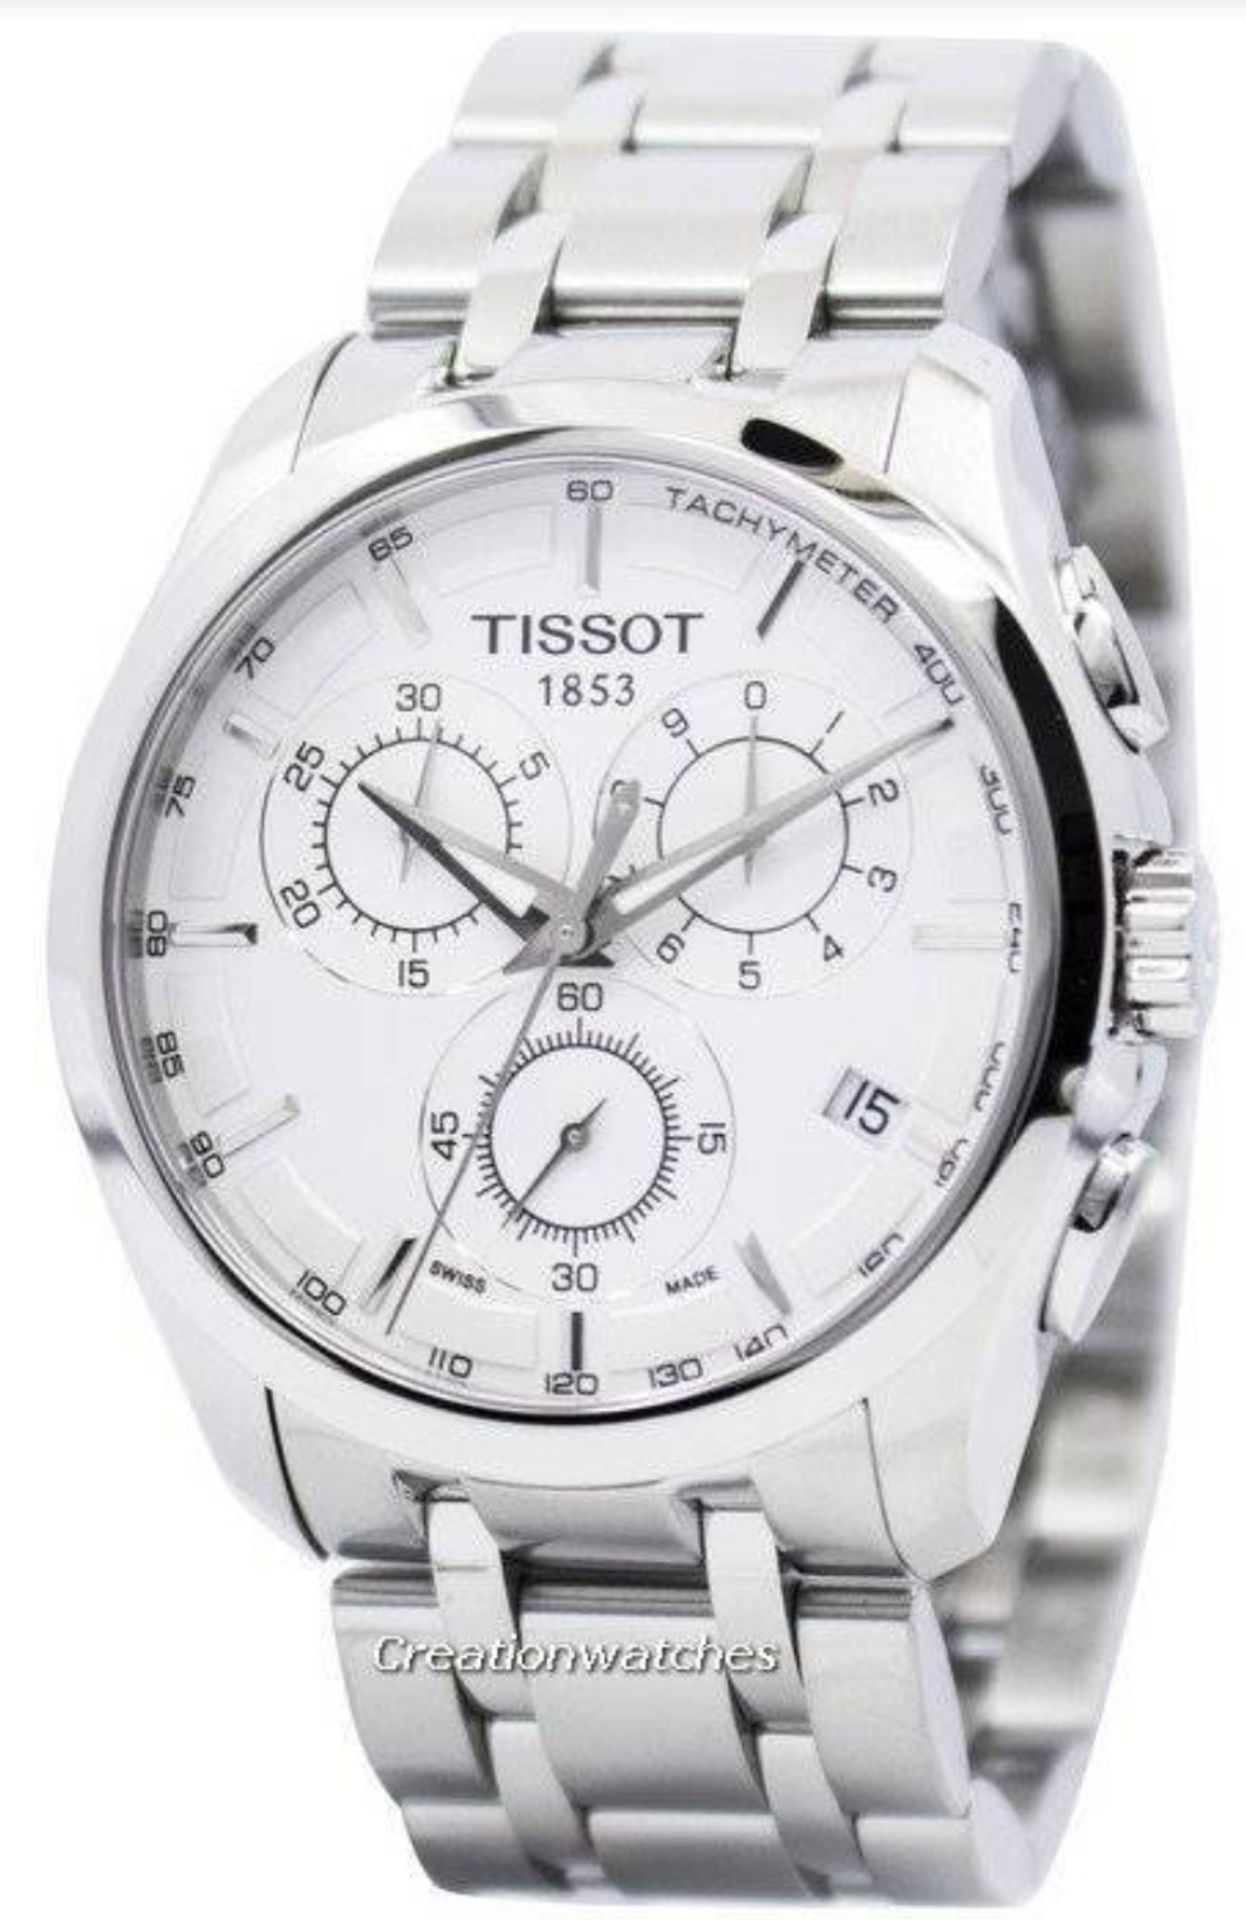 Tissot T035.617.11.031.00 Couturier Stainless Steel Men's Watch - Image 4 of 4